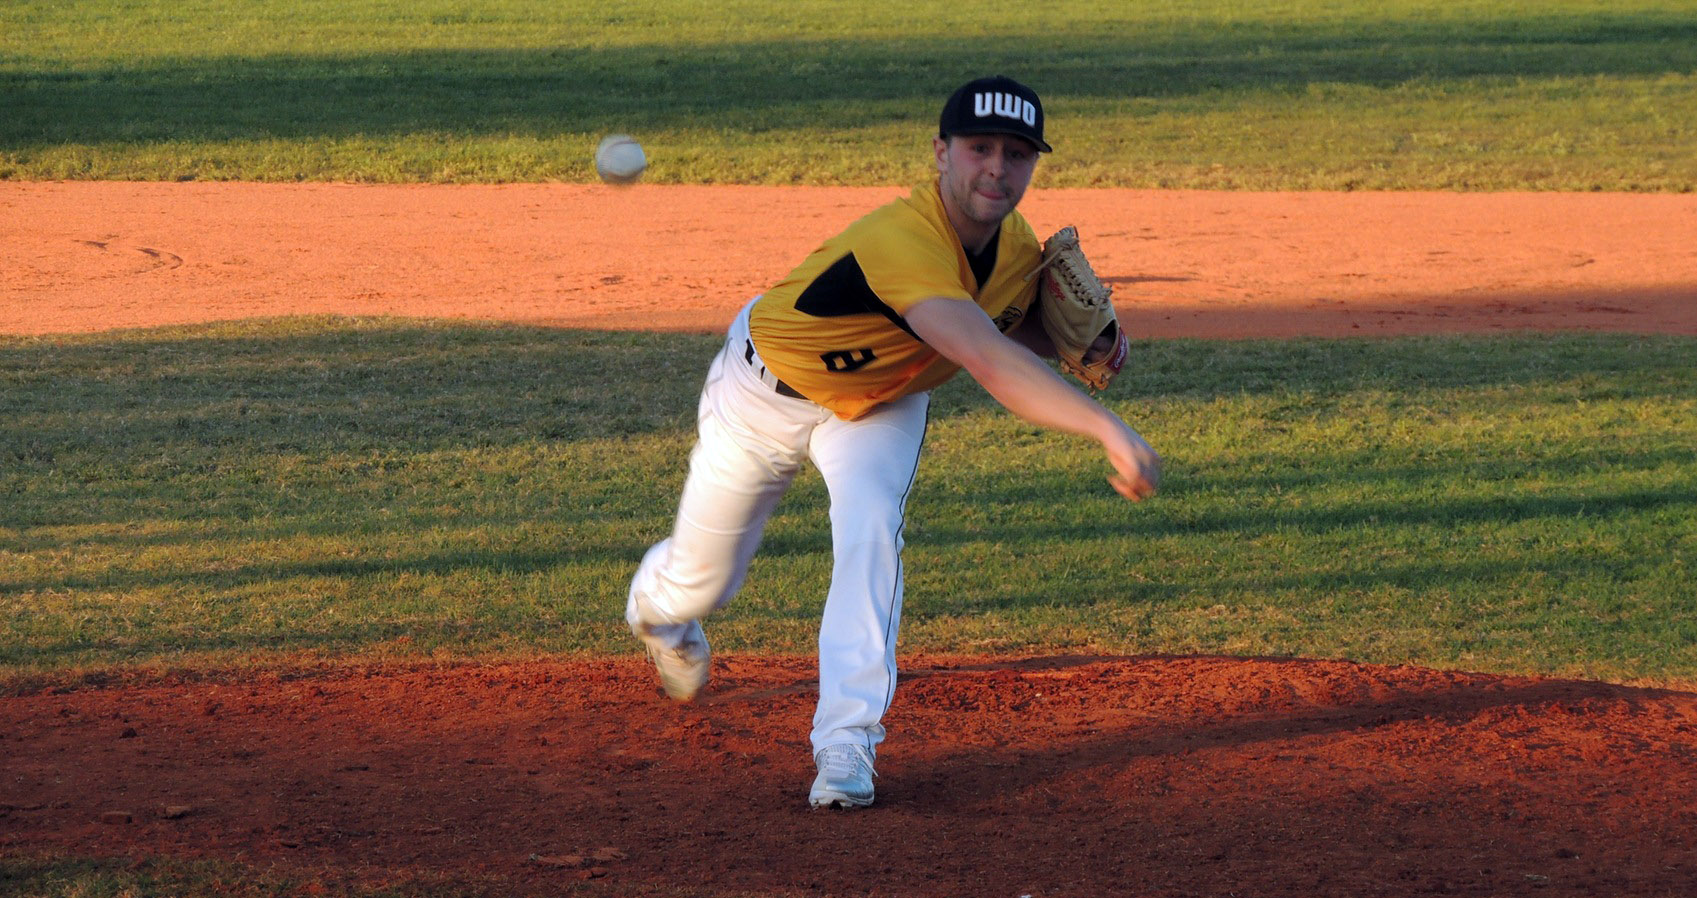 Nick McLees allowed just one unearned run and four hits over seven innings against the Red Hawks. He pitched to only 25 batters, four over the minimum.